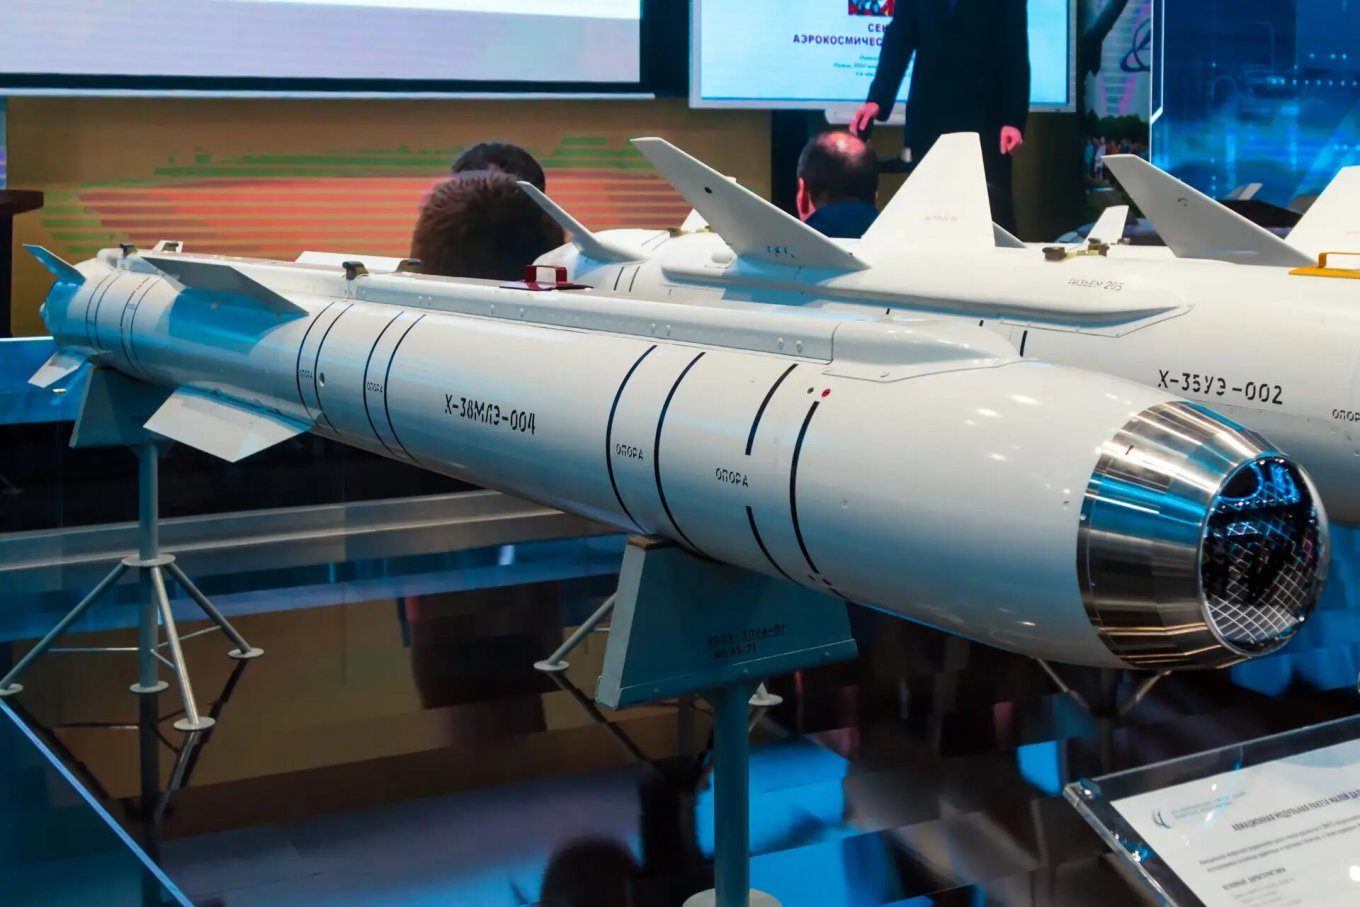 russian Kh-38 missile, Defense Express